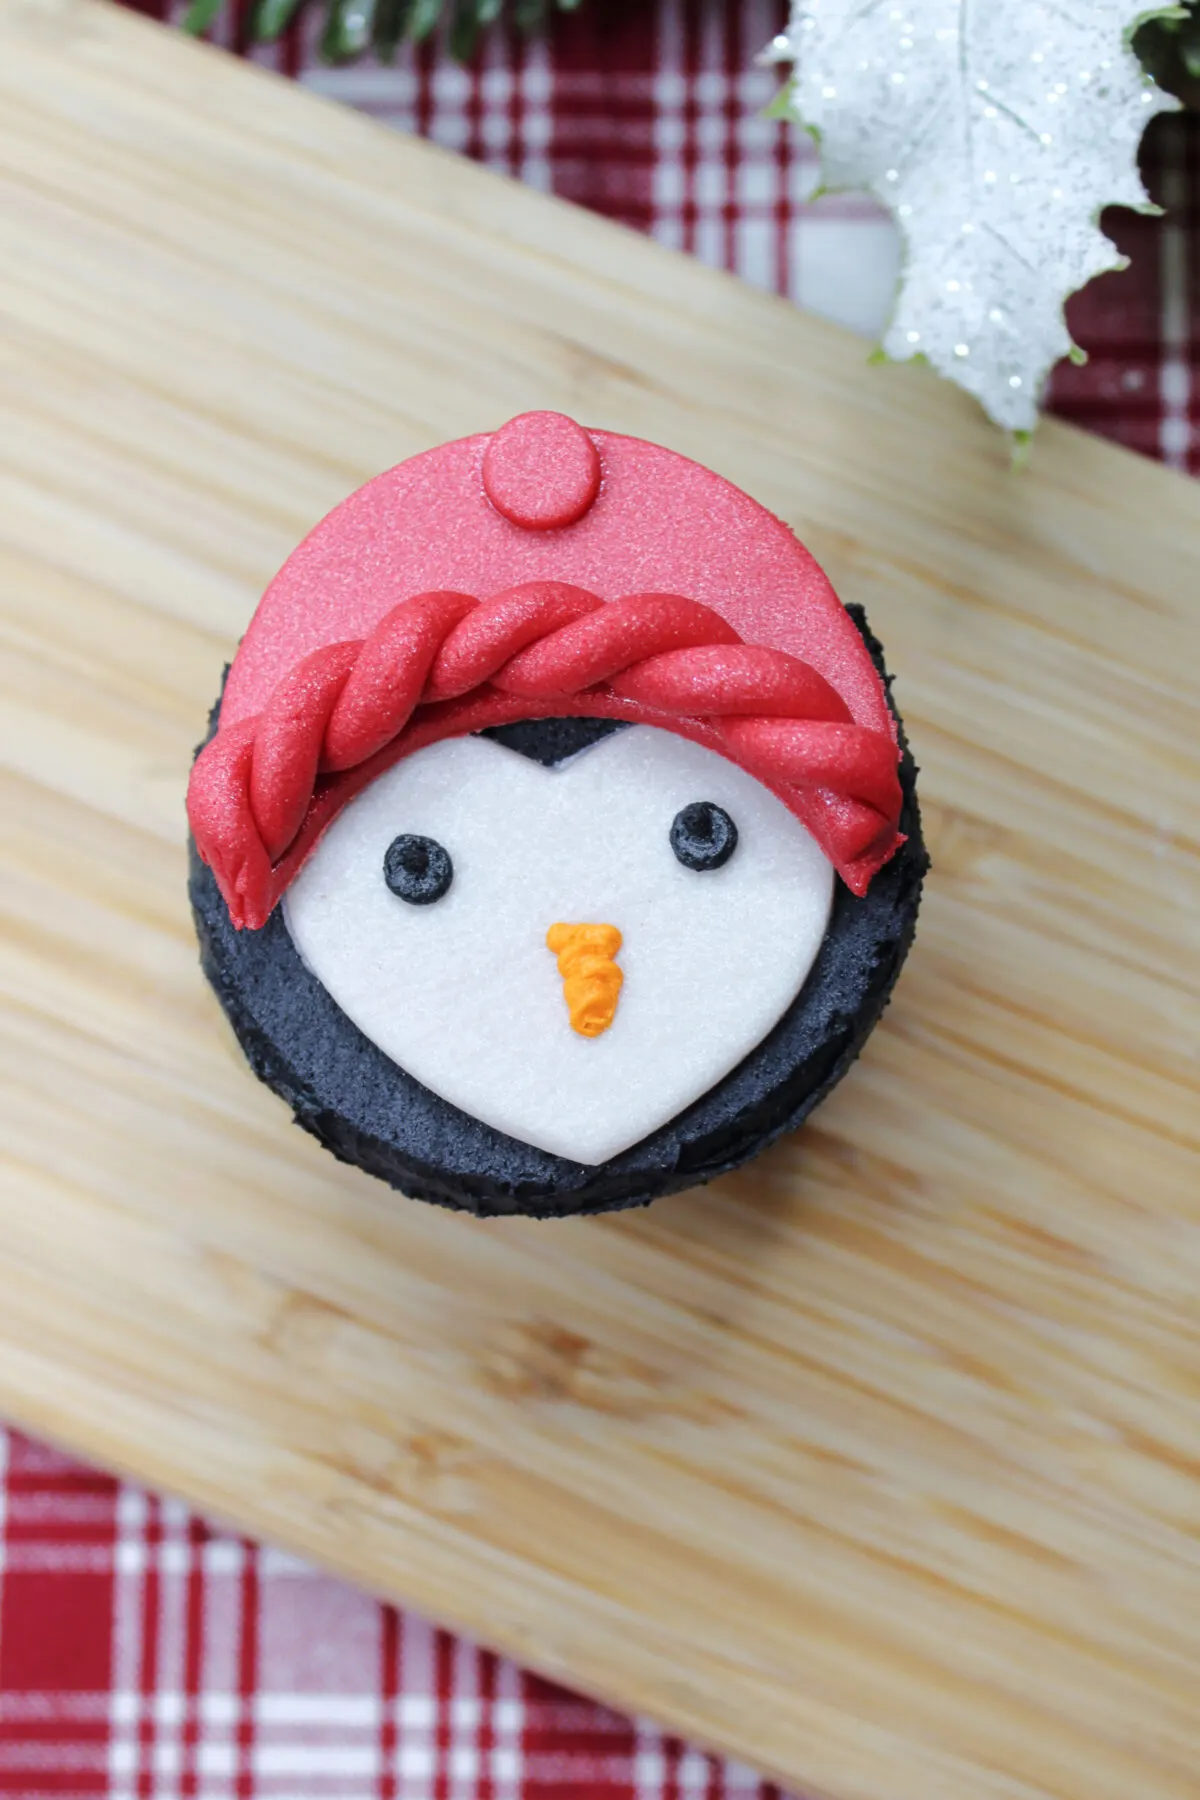 The penguin cupcake fully assembled.